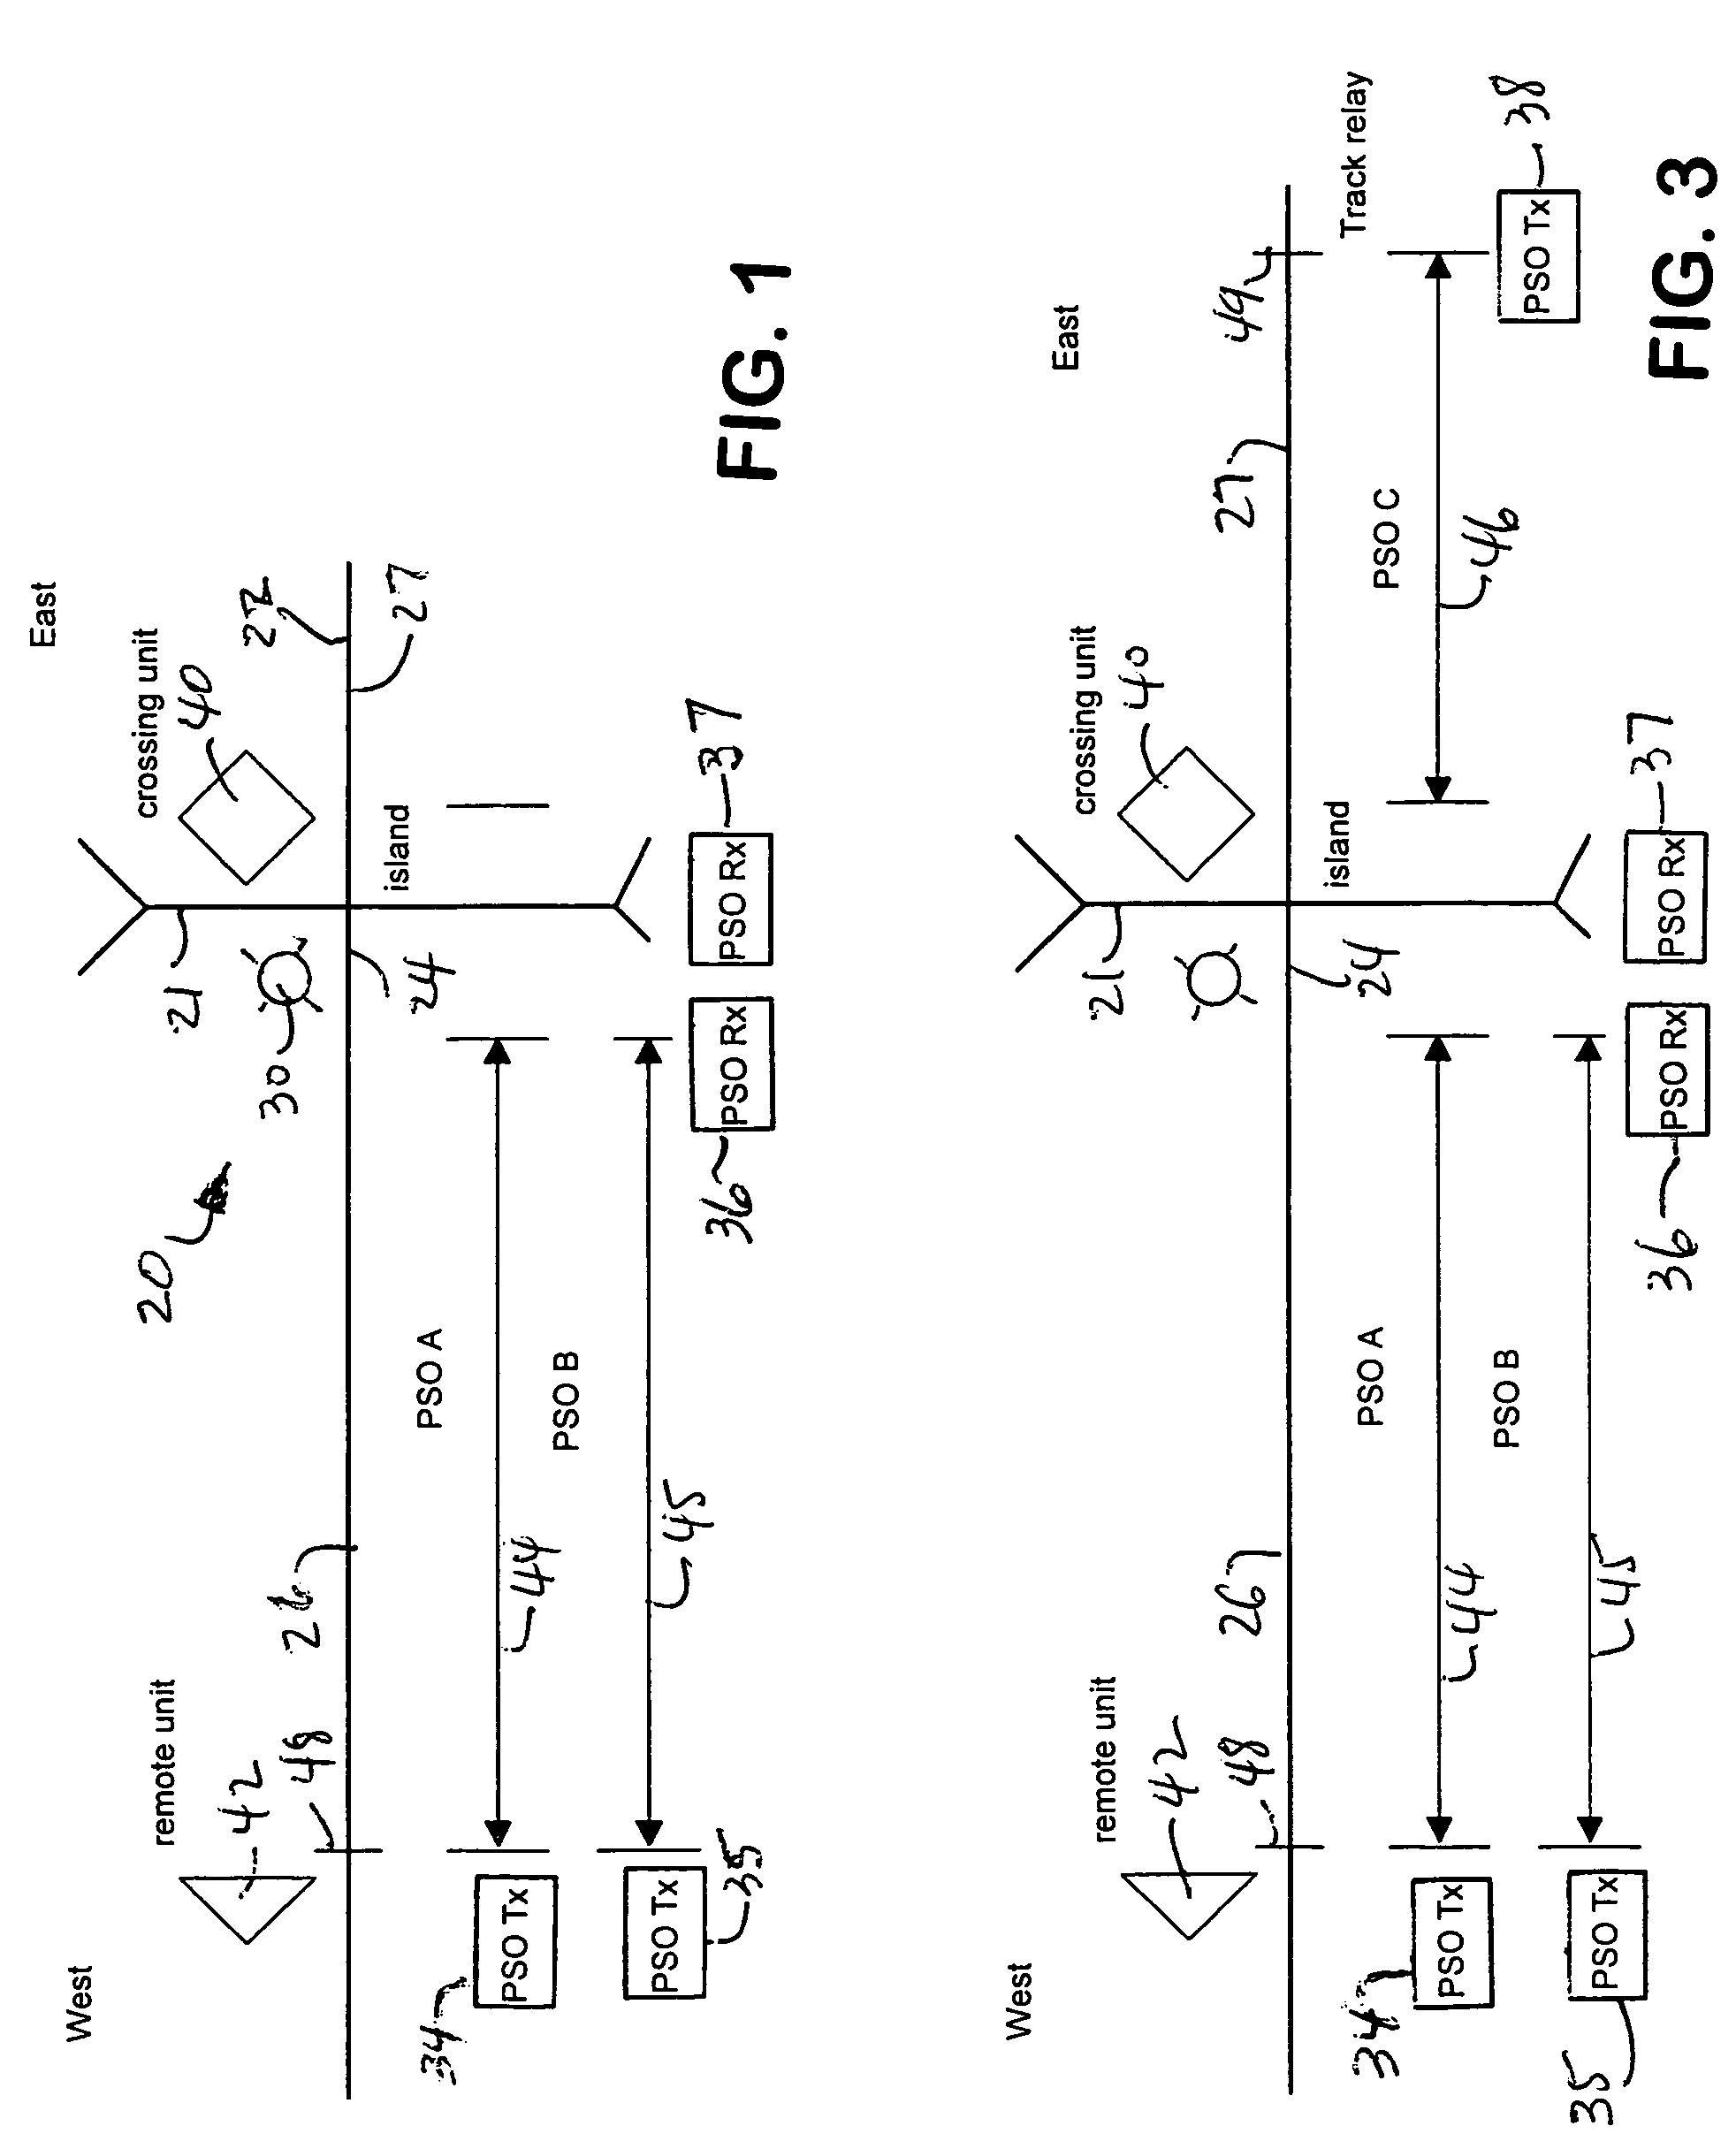 Apparatus and methods for providing relatively constant warning time at highway-rail crossings